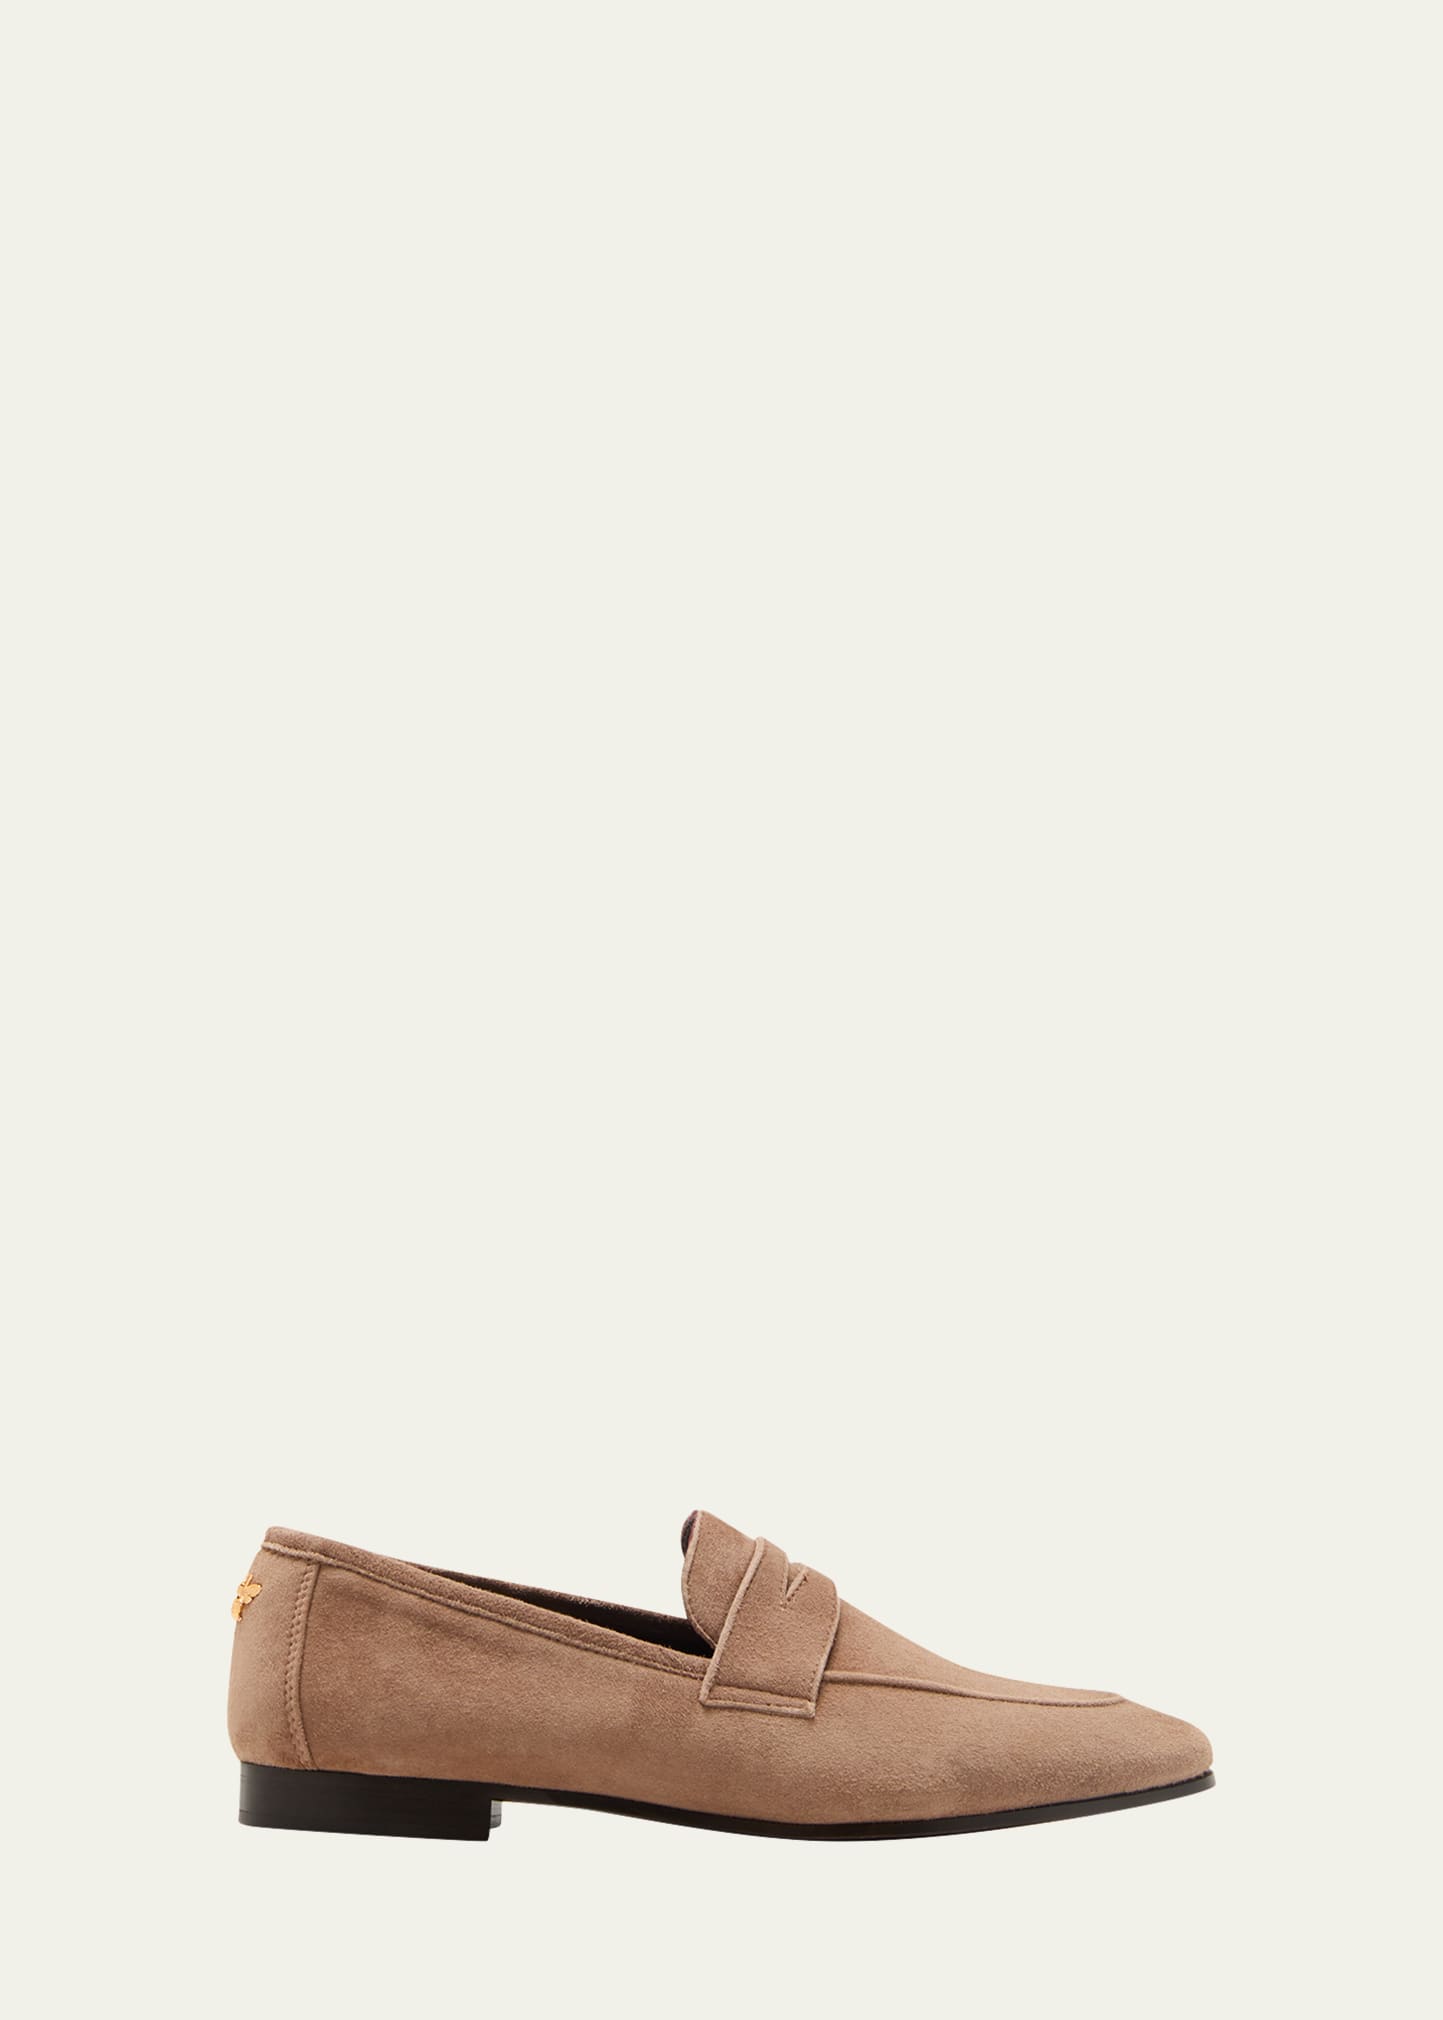 Flaneur Suede Penny Loafers